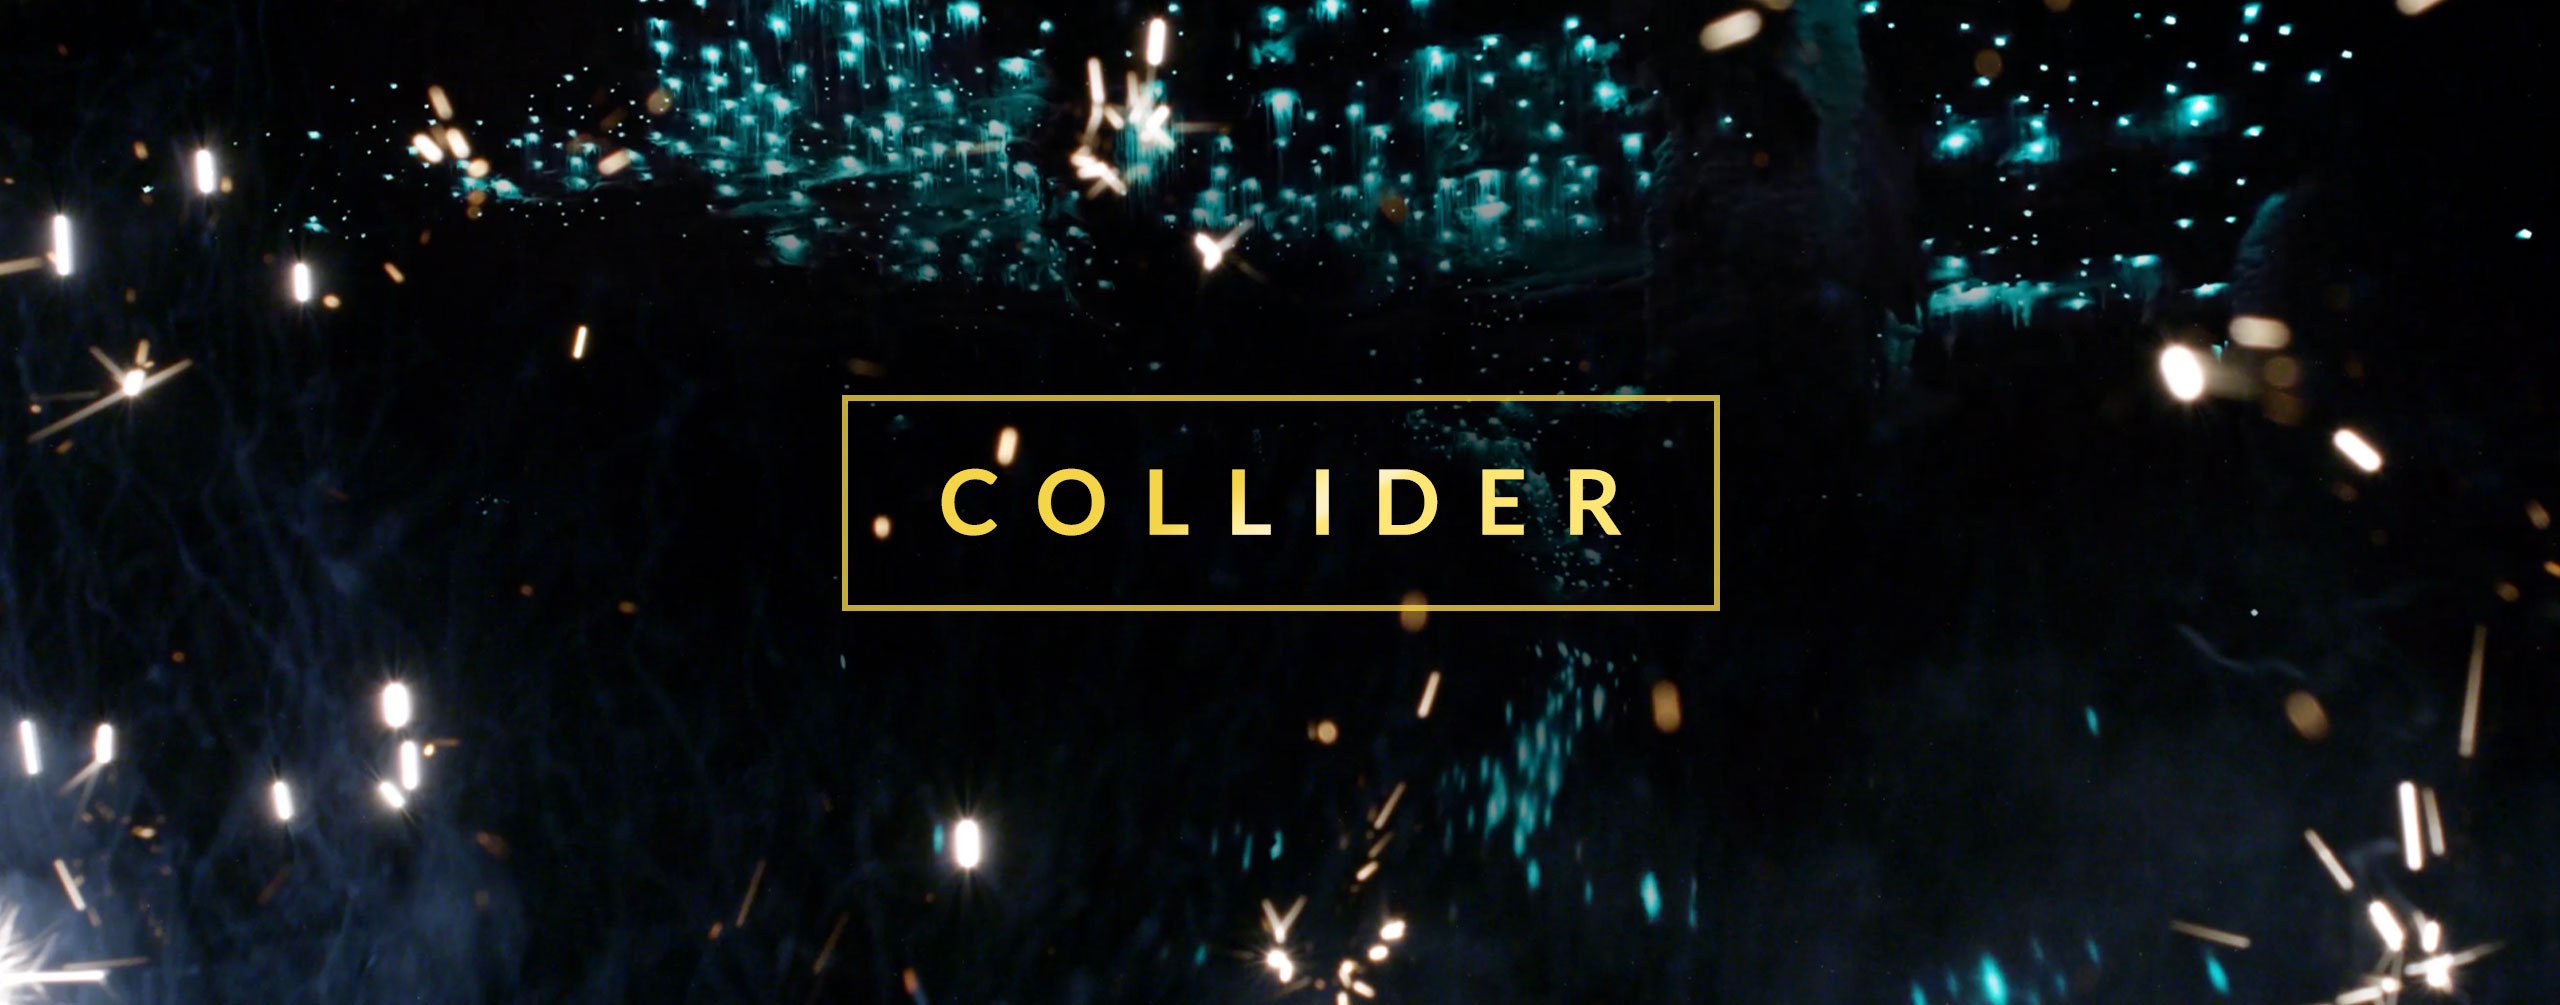 Collider - Particle Video Effects